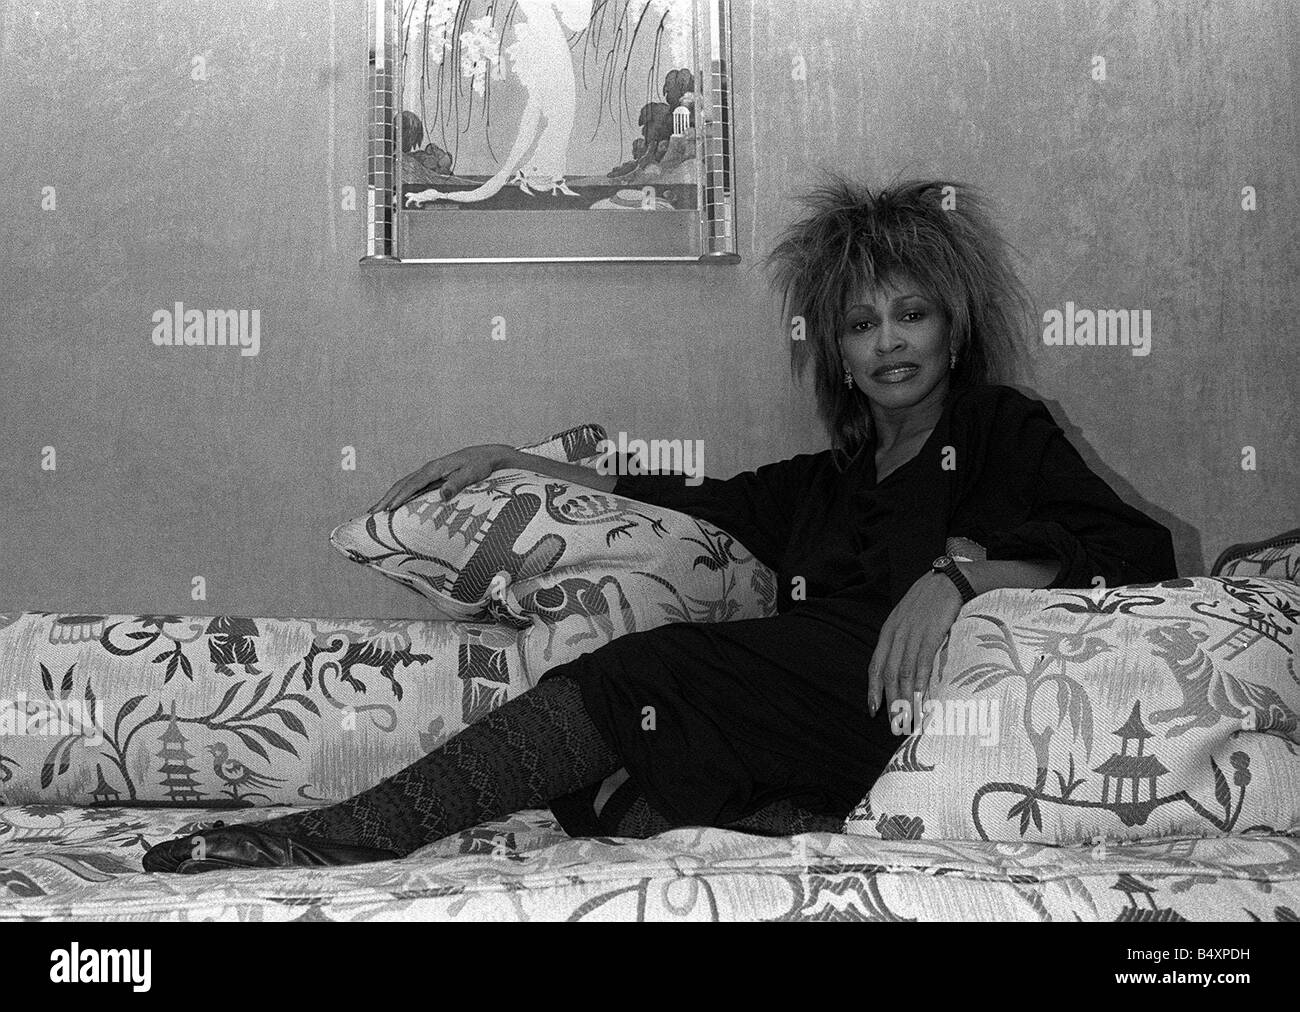 Singer Tina Turner on tour photographed in her hotel room in Paris Stock Photo